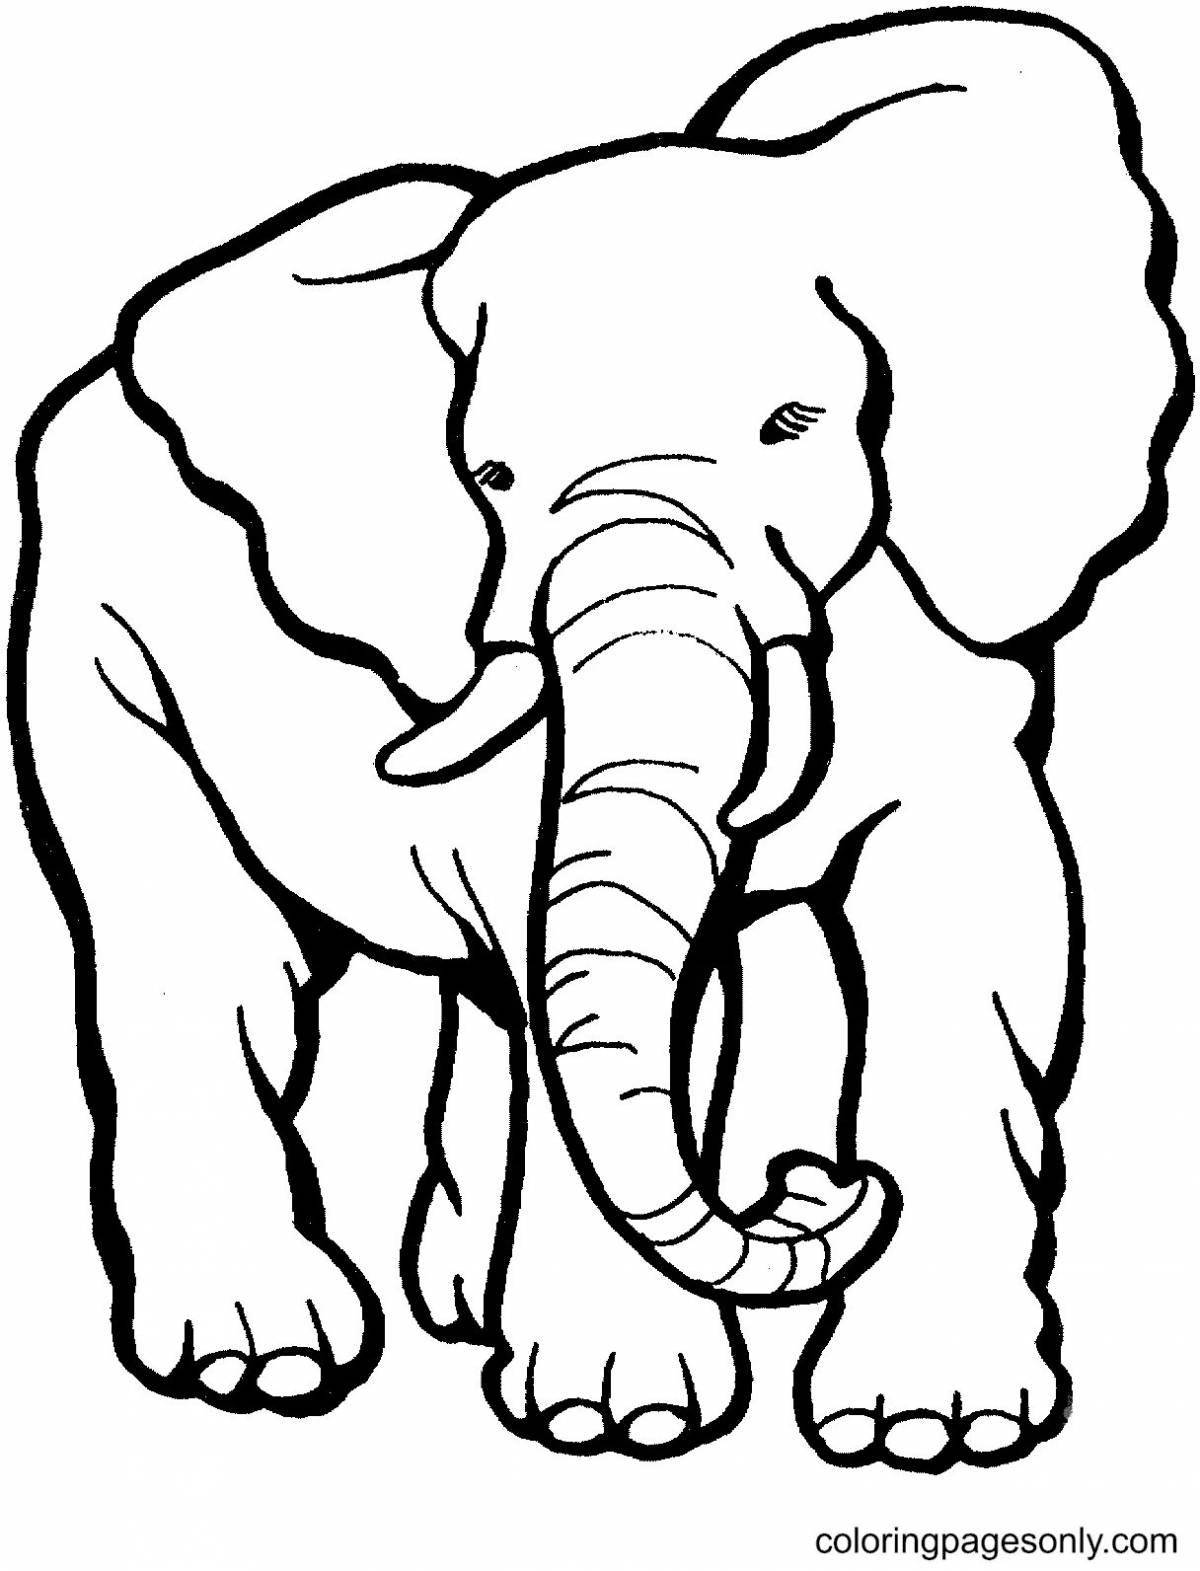 Great elephant coloring pages for kids